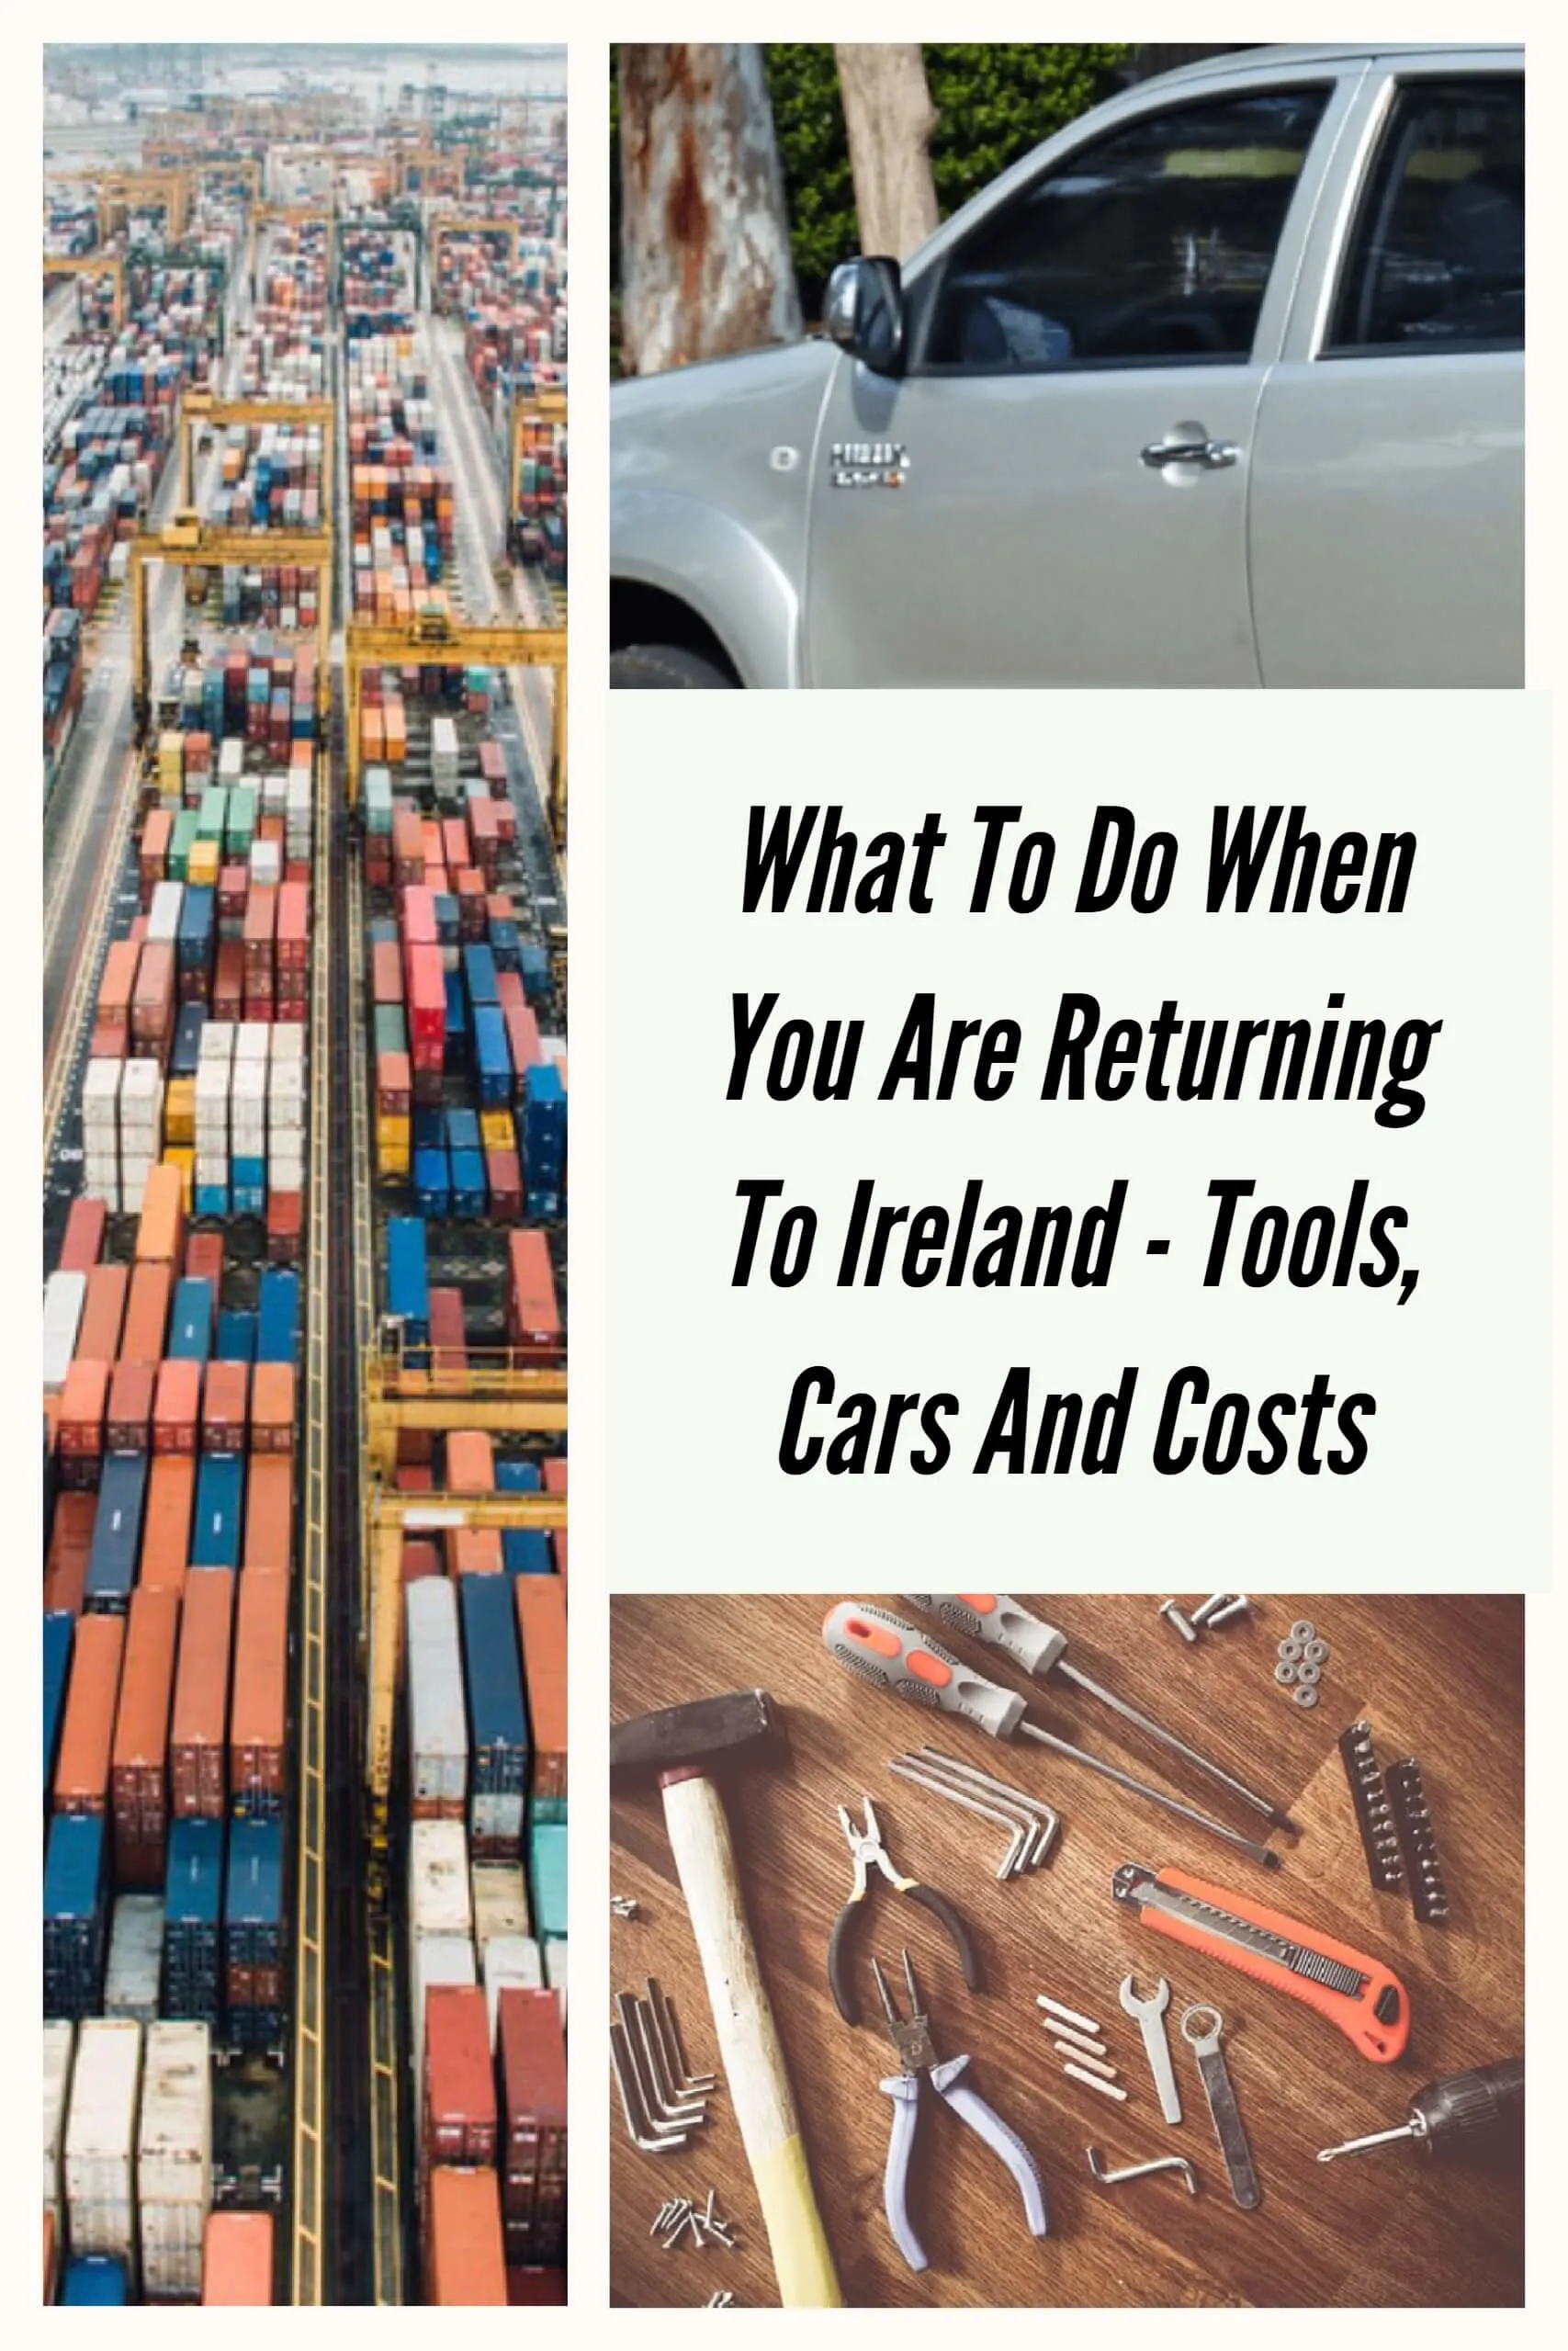 What to do when you are returning to Ireland